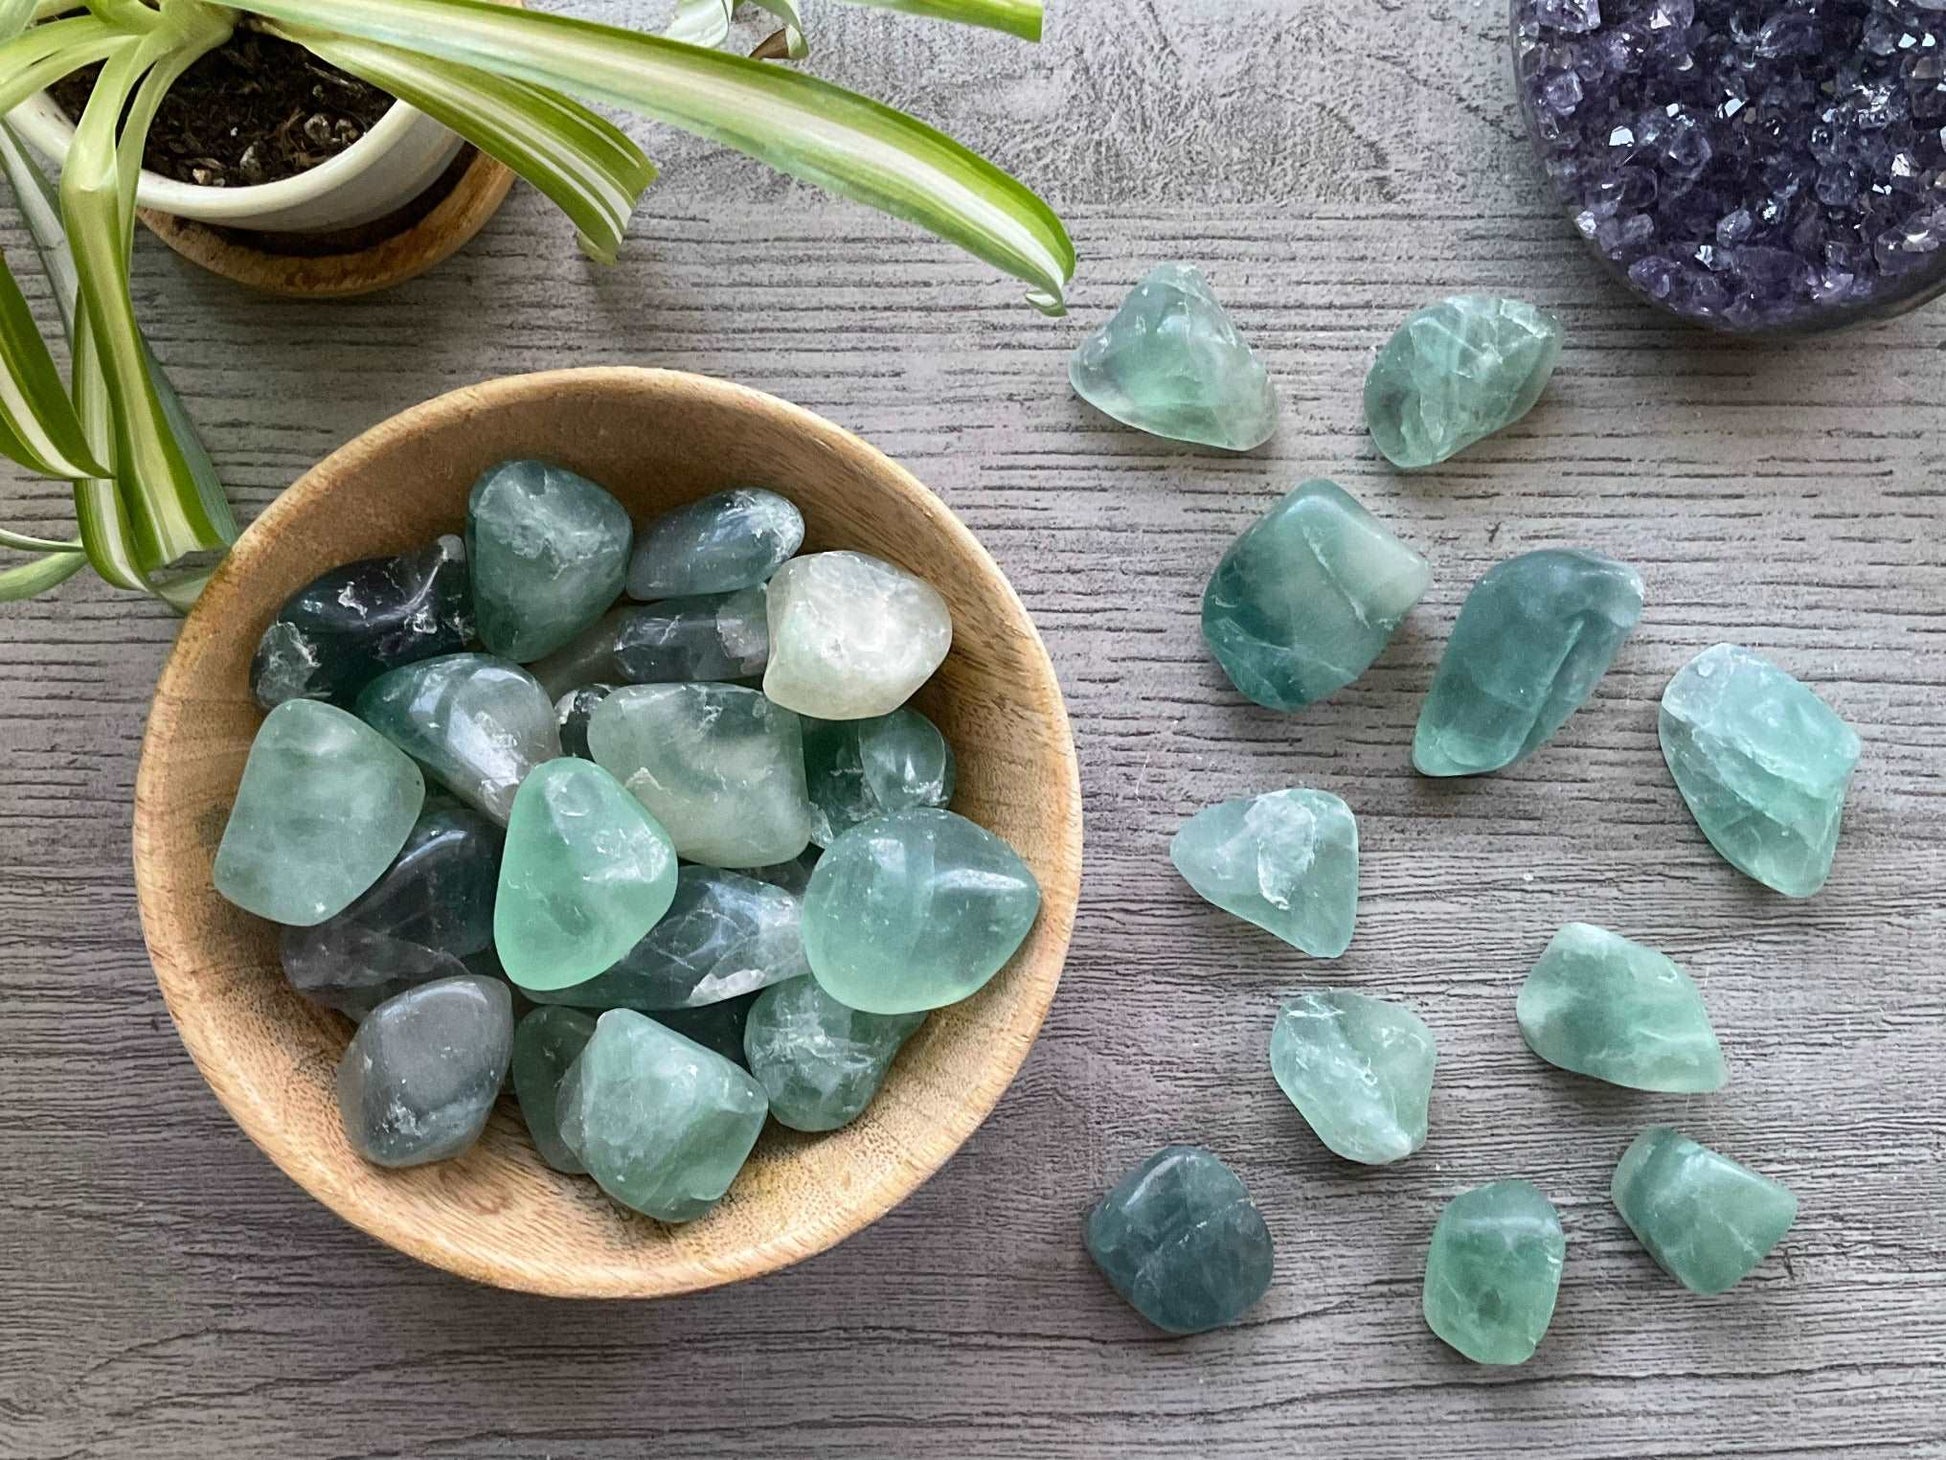 Pictured are various fluorite tumbled stones.